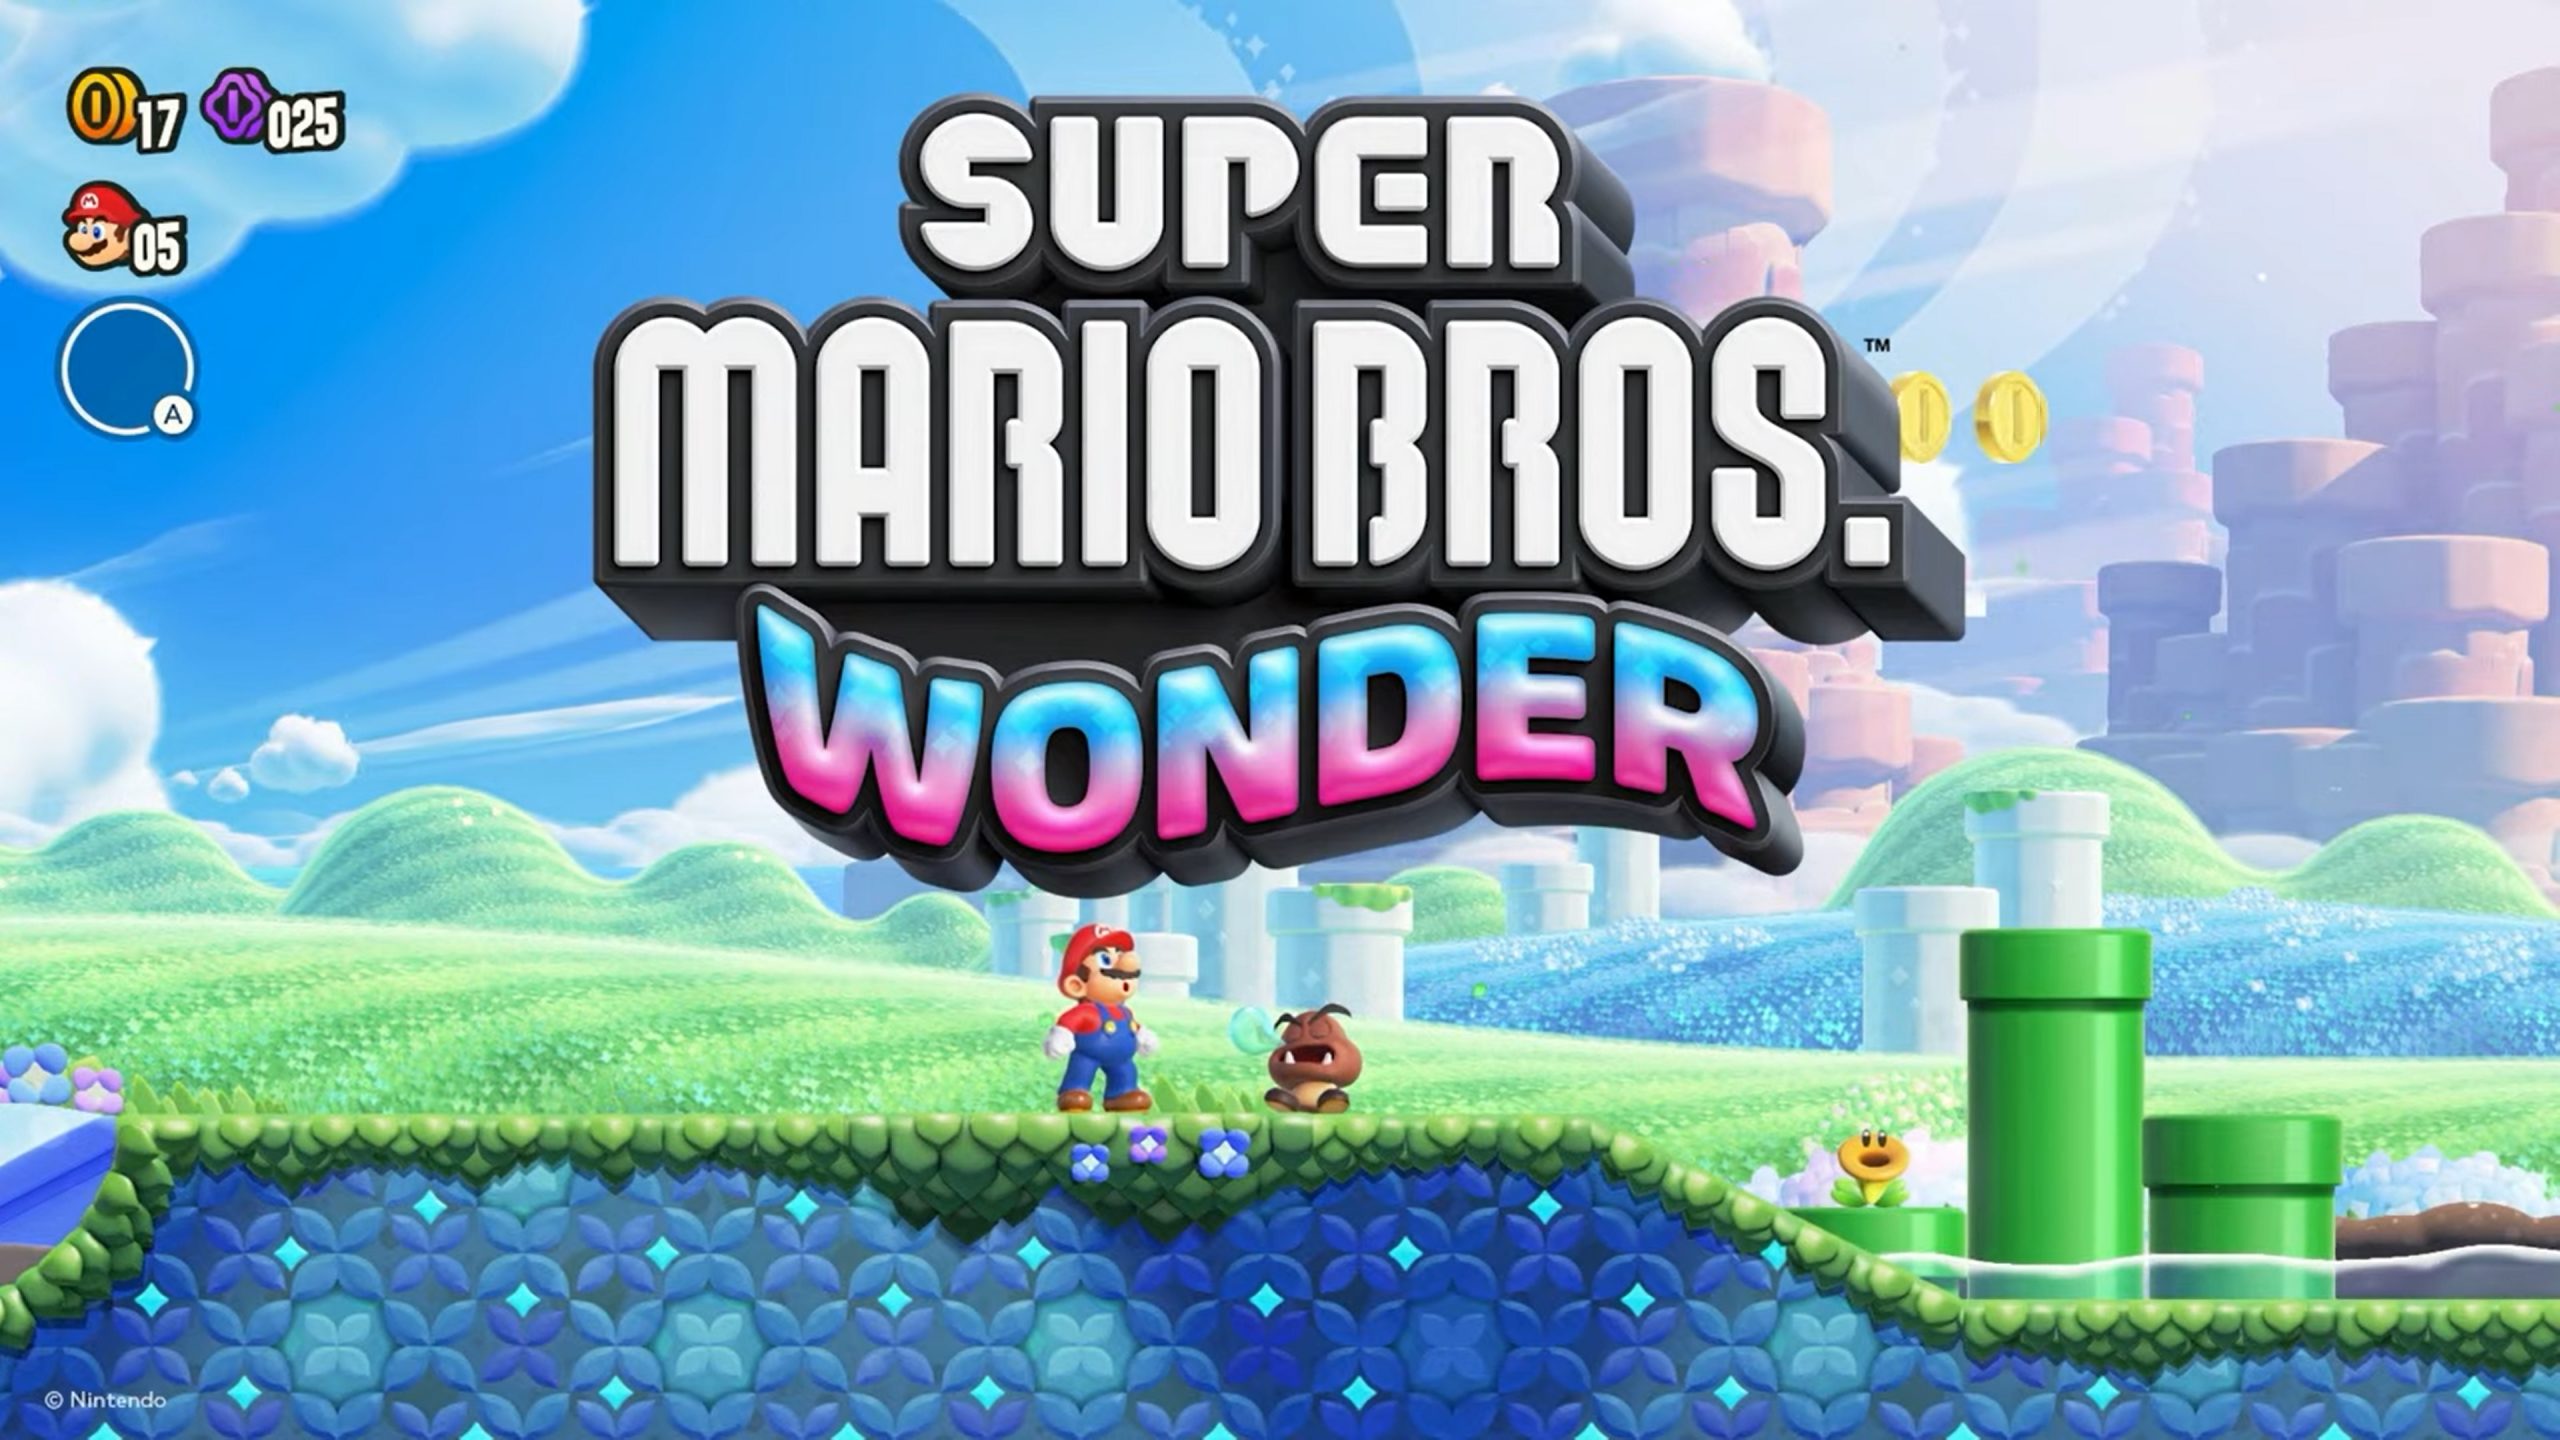 The number of physical copies of Super Mario Bros. Wonder sold in Japan totalled over 638 thousand. The game took first place in the charts